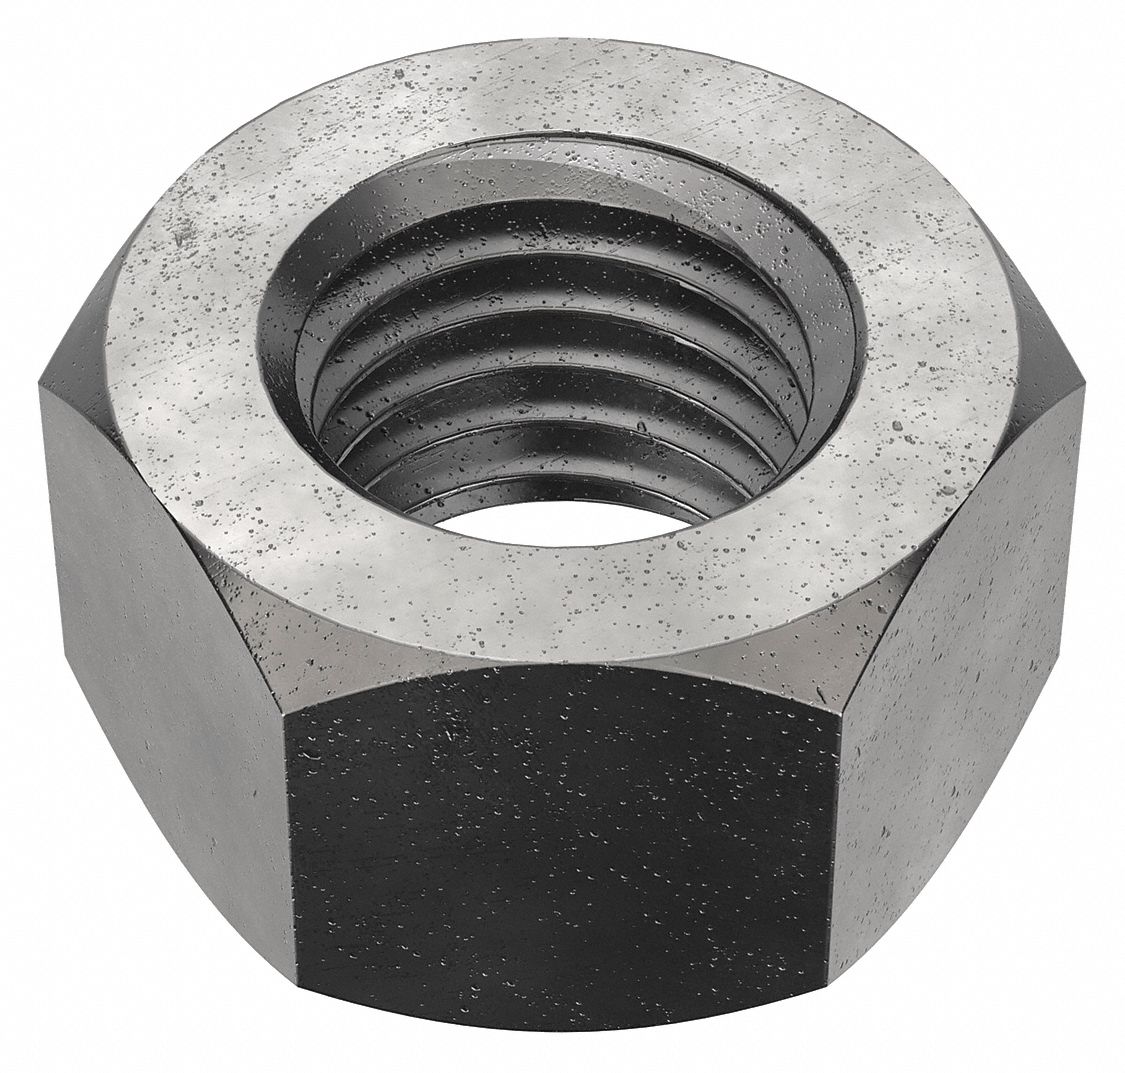 HEAVY HEX NUT A563-DH 3/4-10,10/PK